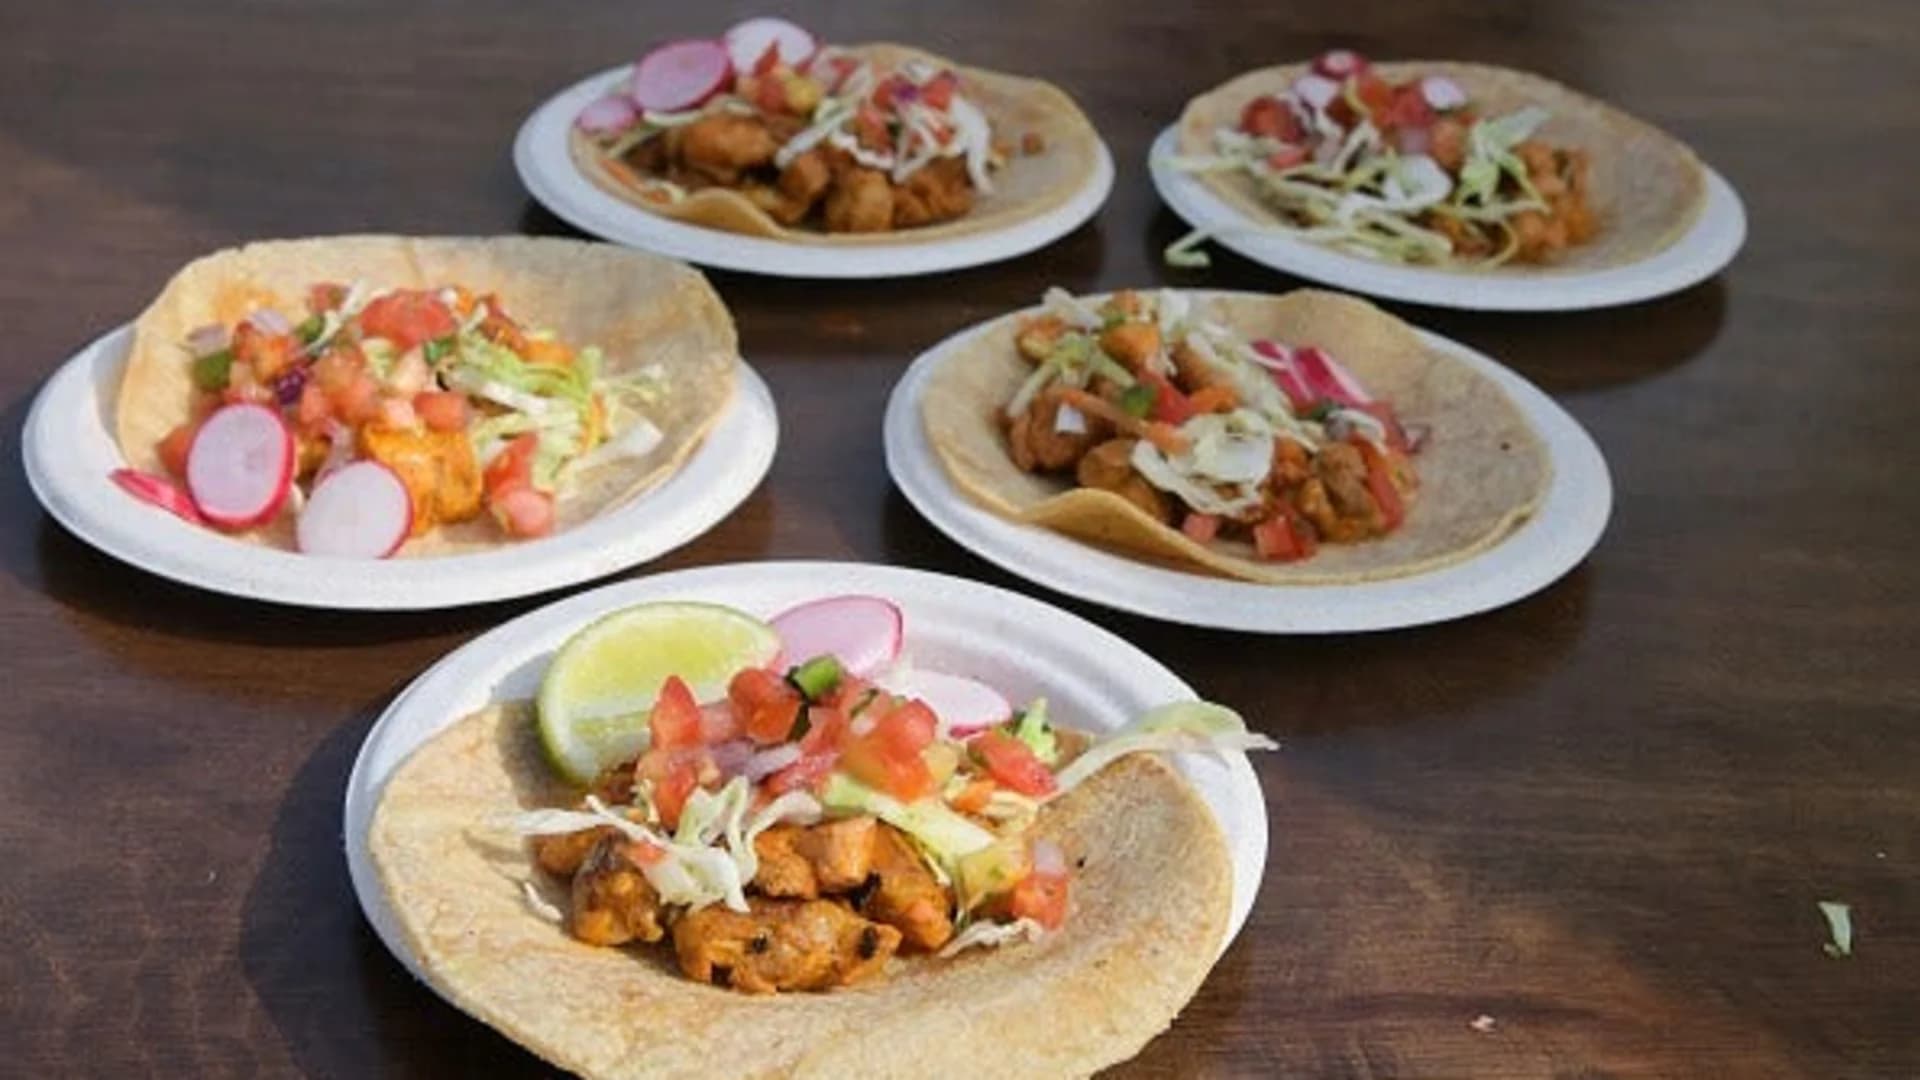 Deals: National Taco Day 2019